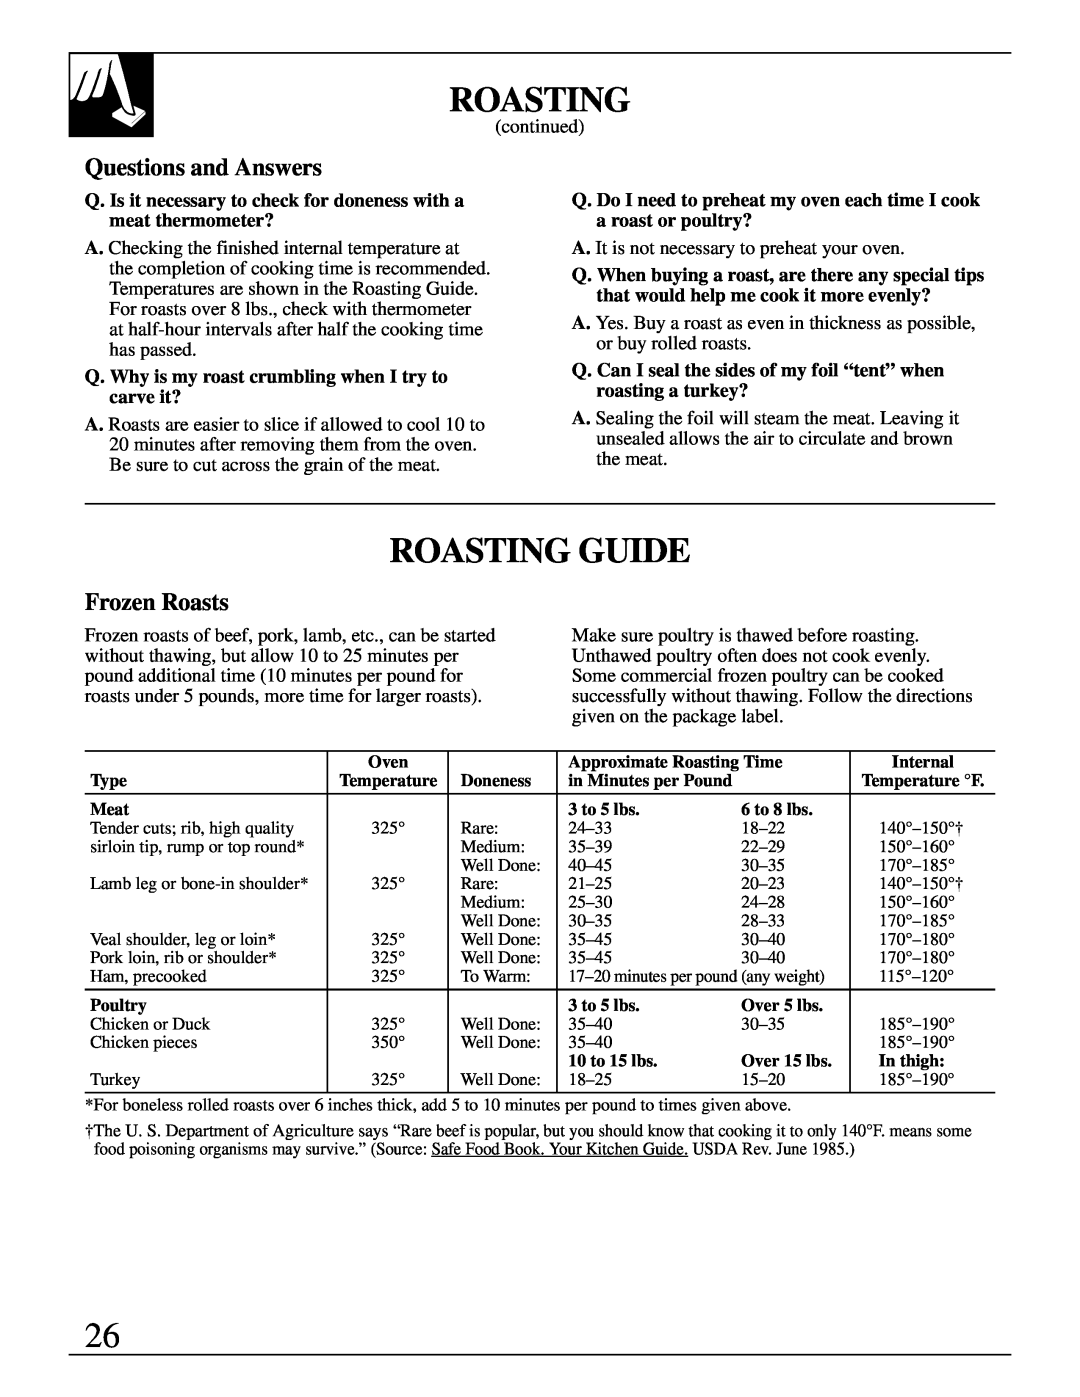 GE RB787 Roasting Guide, Frozen Roasts, Questions and Answers, Q. Why is my roast crumbling when I try to carve it? 